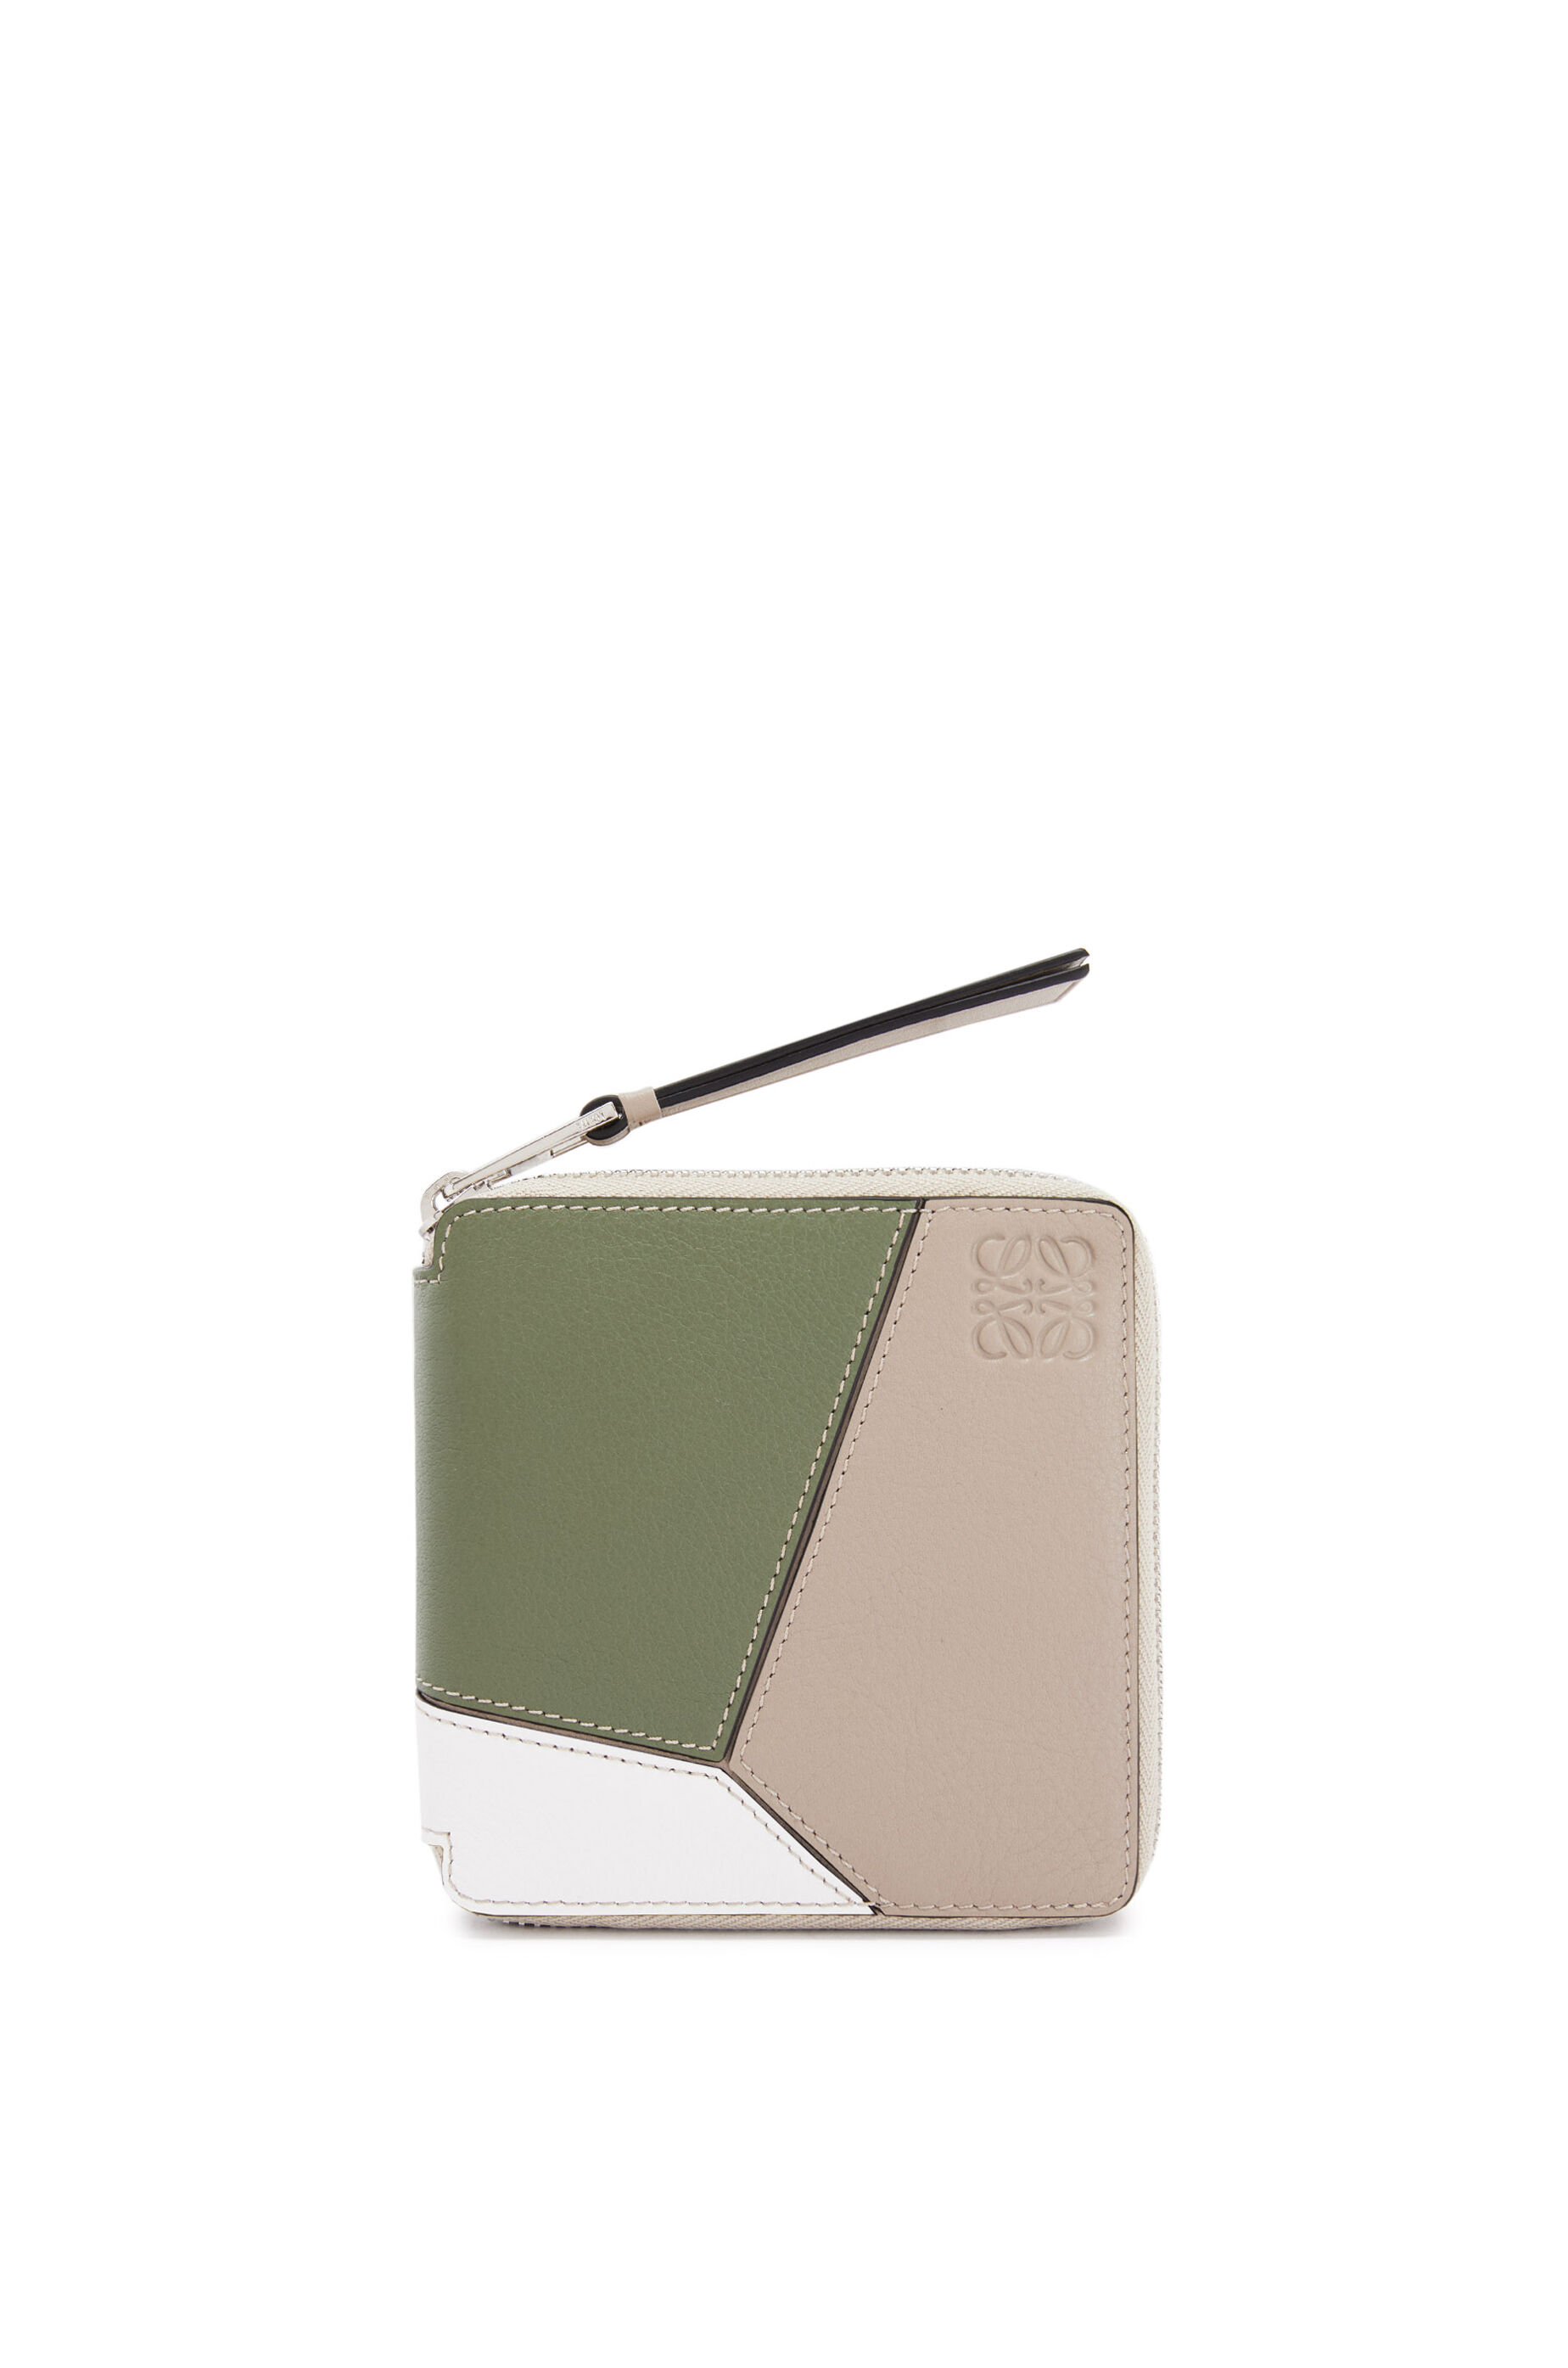 Puzzle squared zip wallet in classic calfskin Sand/Avocado Green 